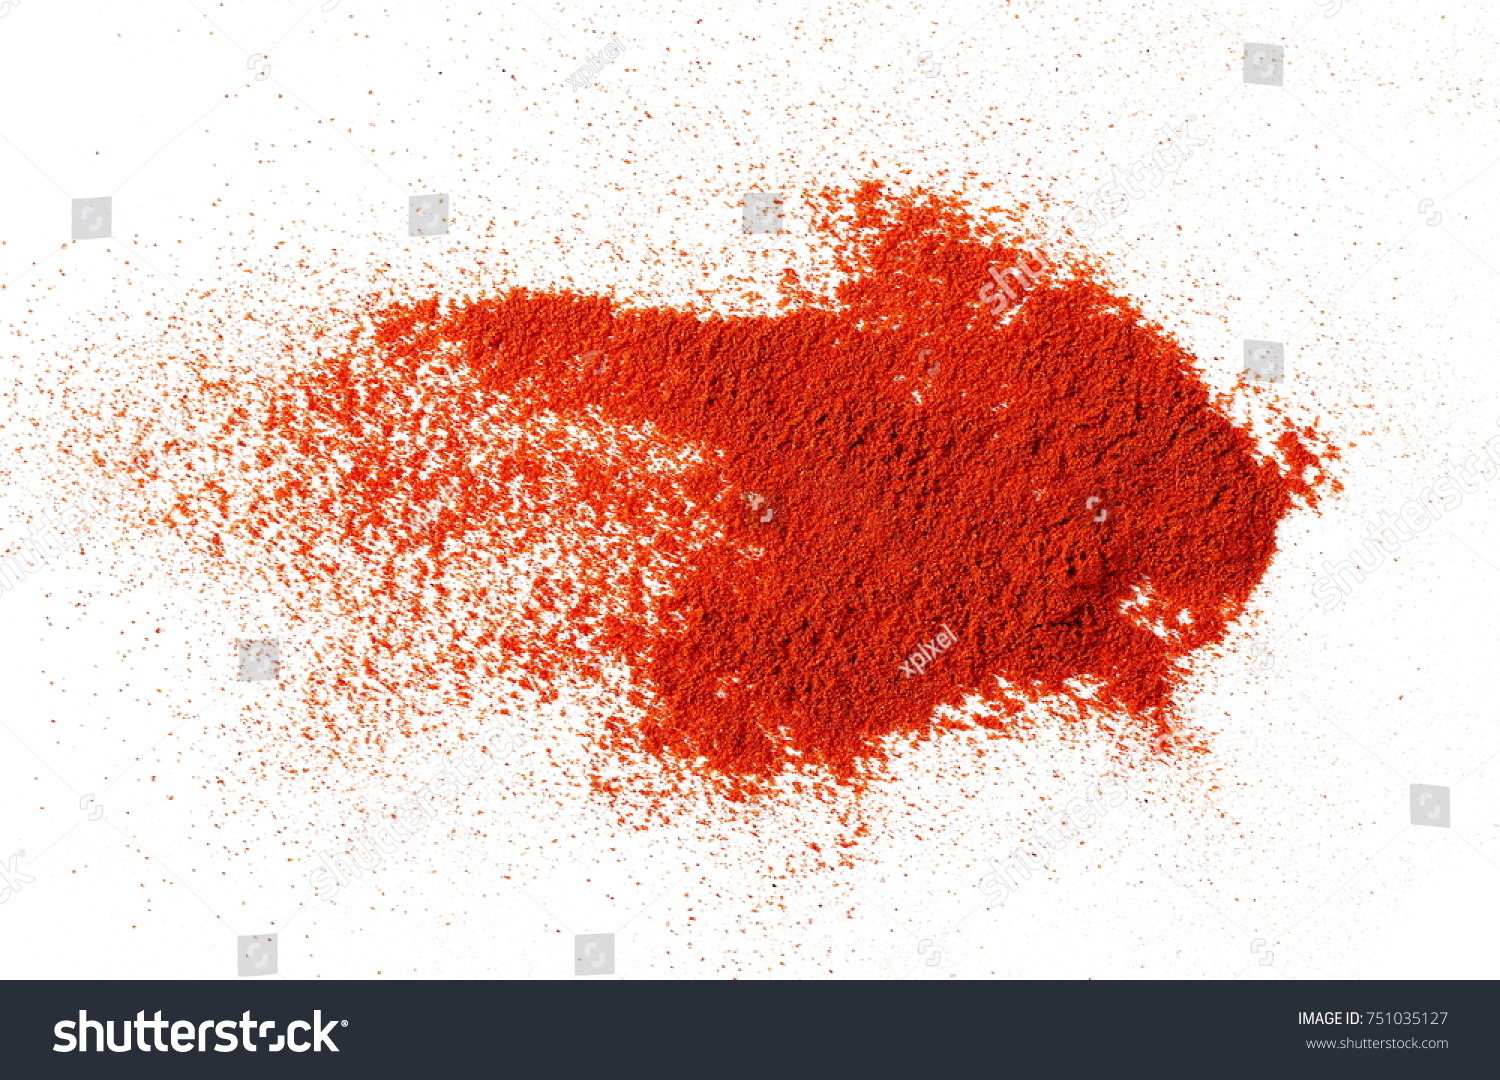 Pile of red paprika powder isolated on white background, top view #751035127